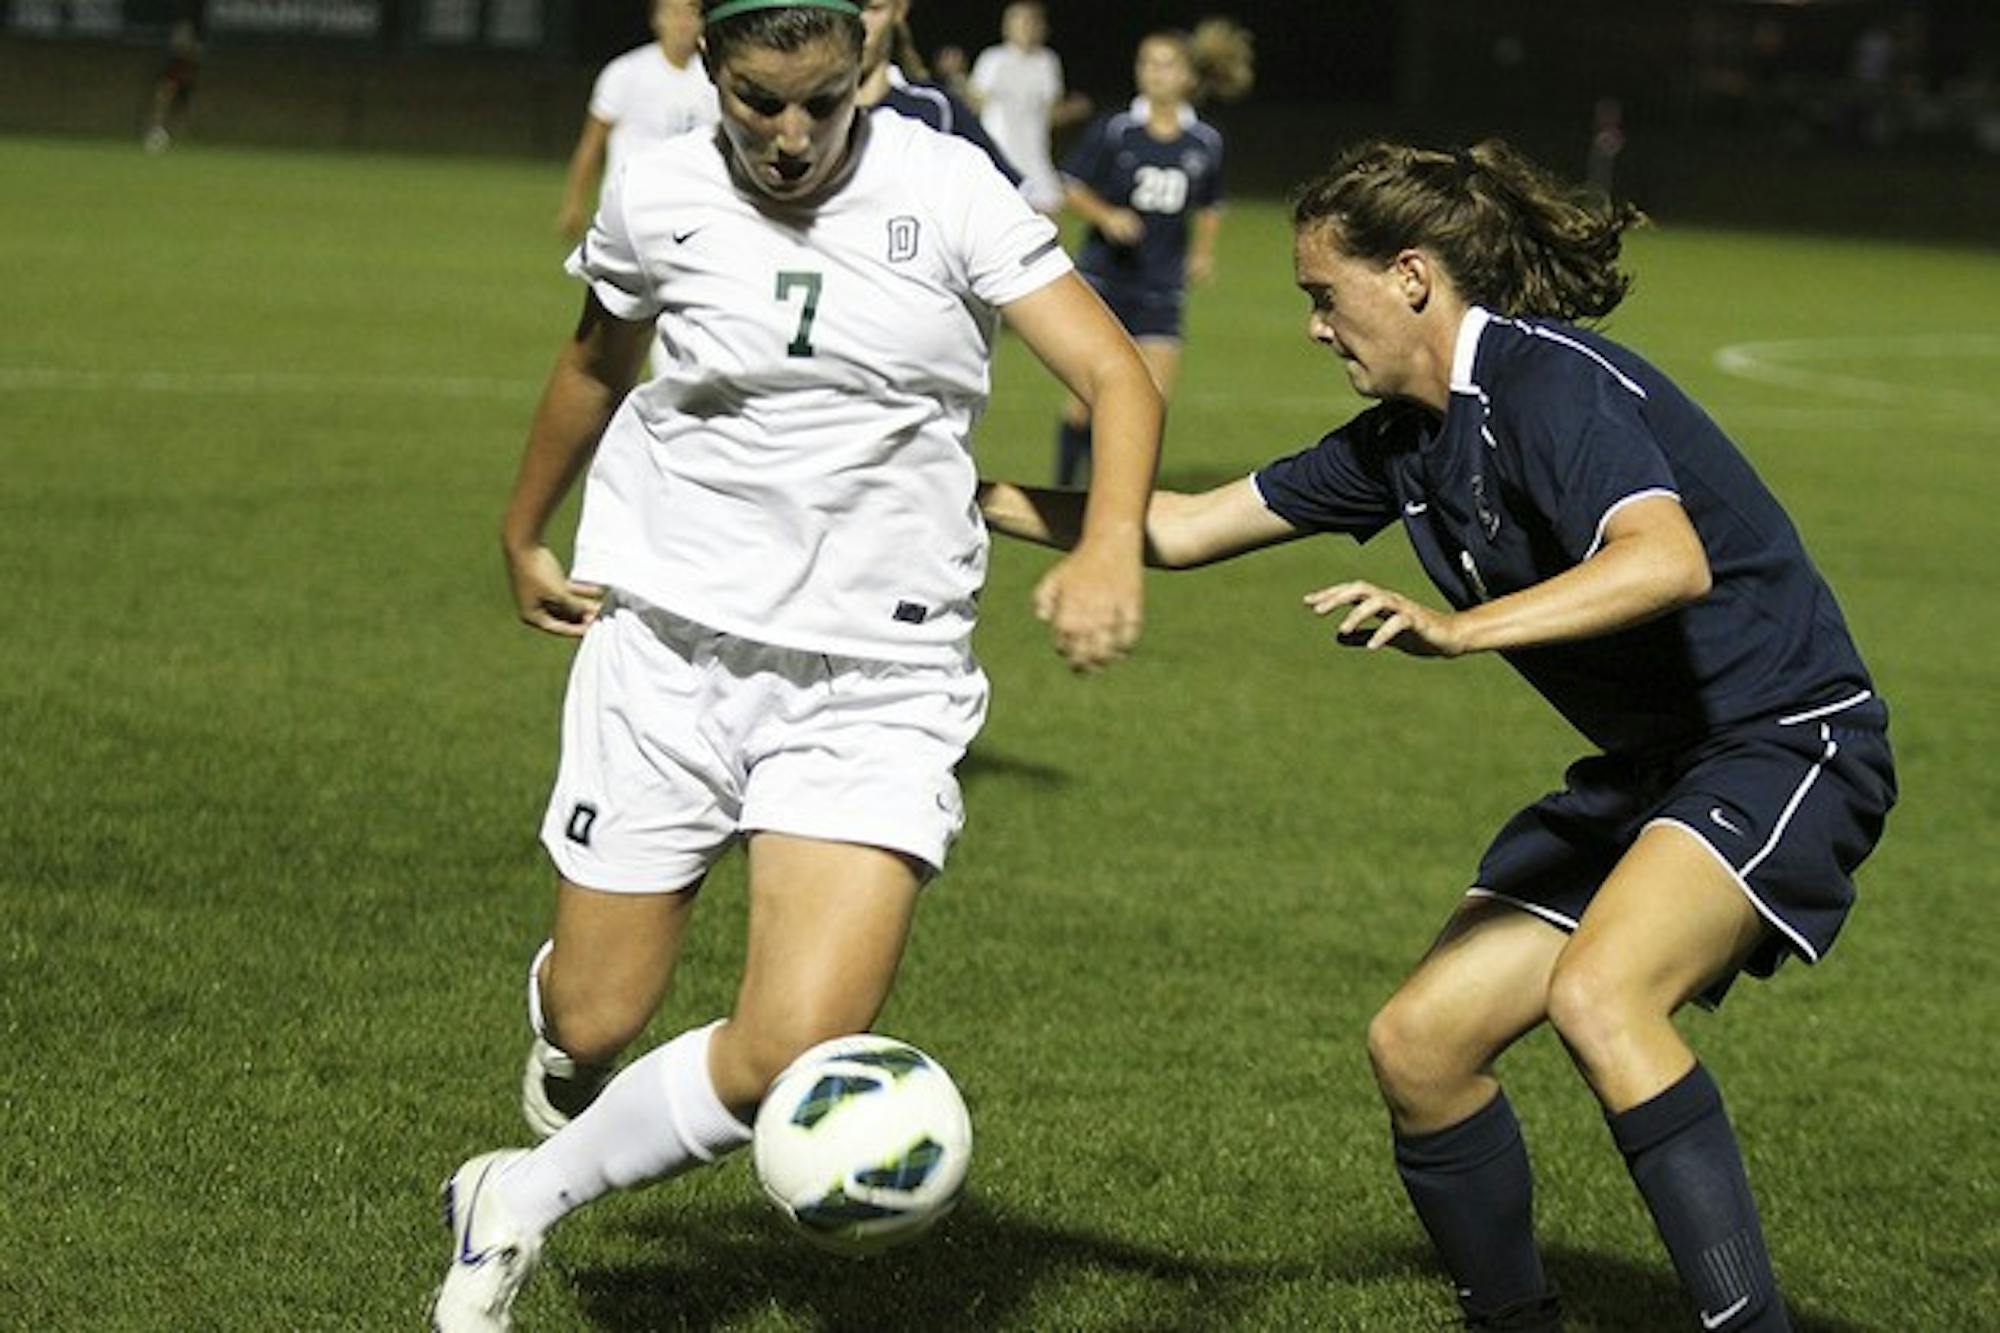 Marina Moschitto '14 scored the opening goal for Dartmouth on Friday night against UNH. She added another on Sunday against Fordham.